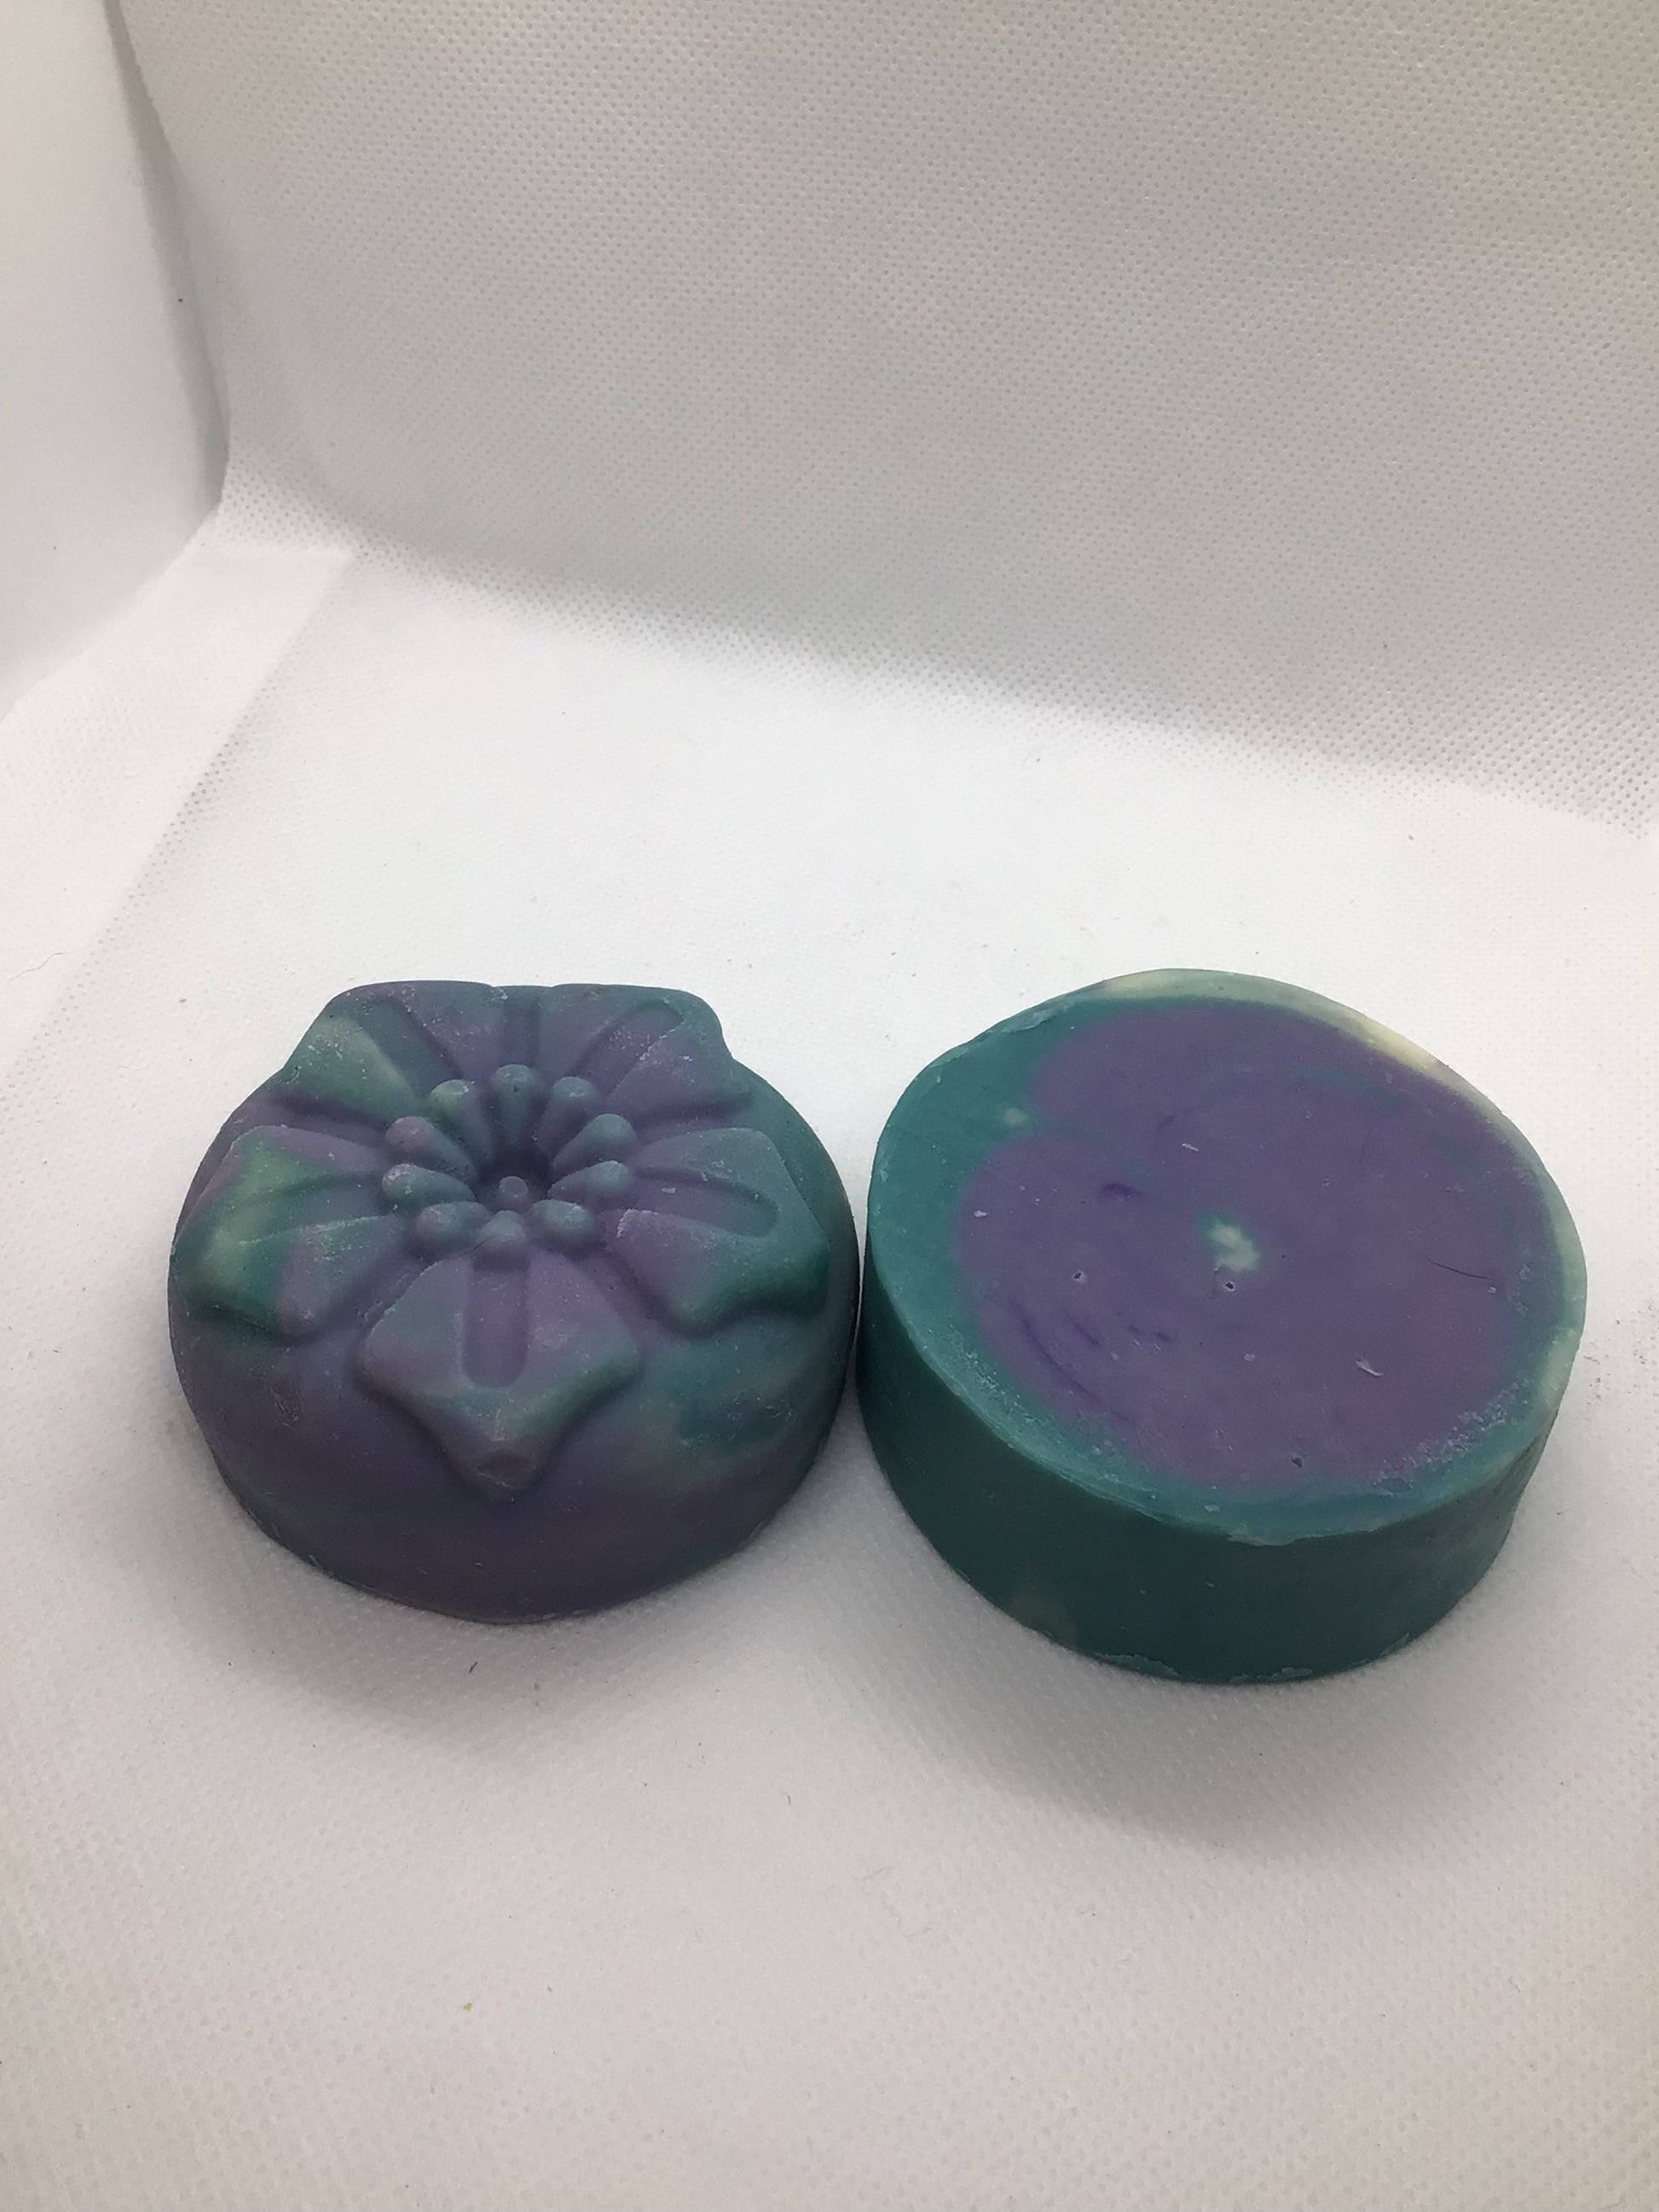 one round soap colored in blue purple and white, one flower shaped soap colored in blue and purple.